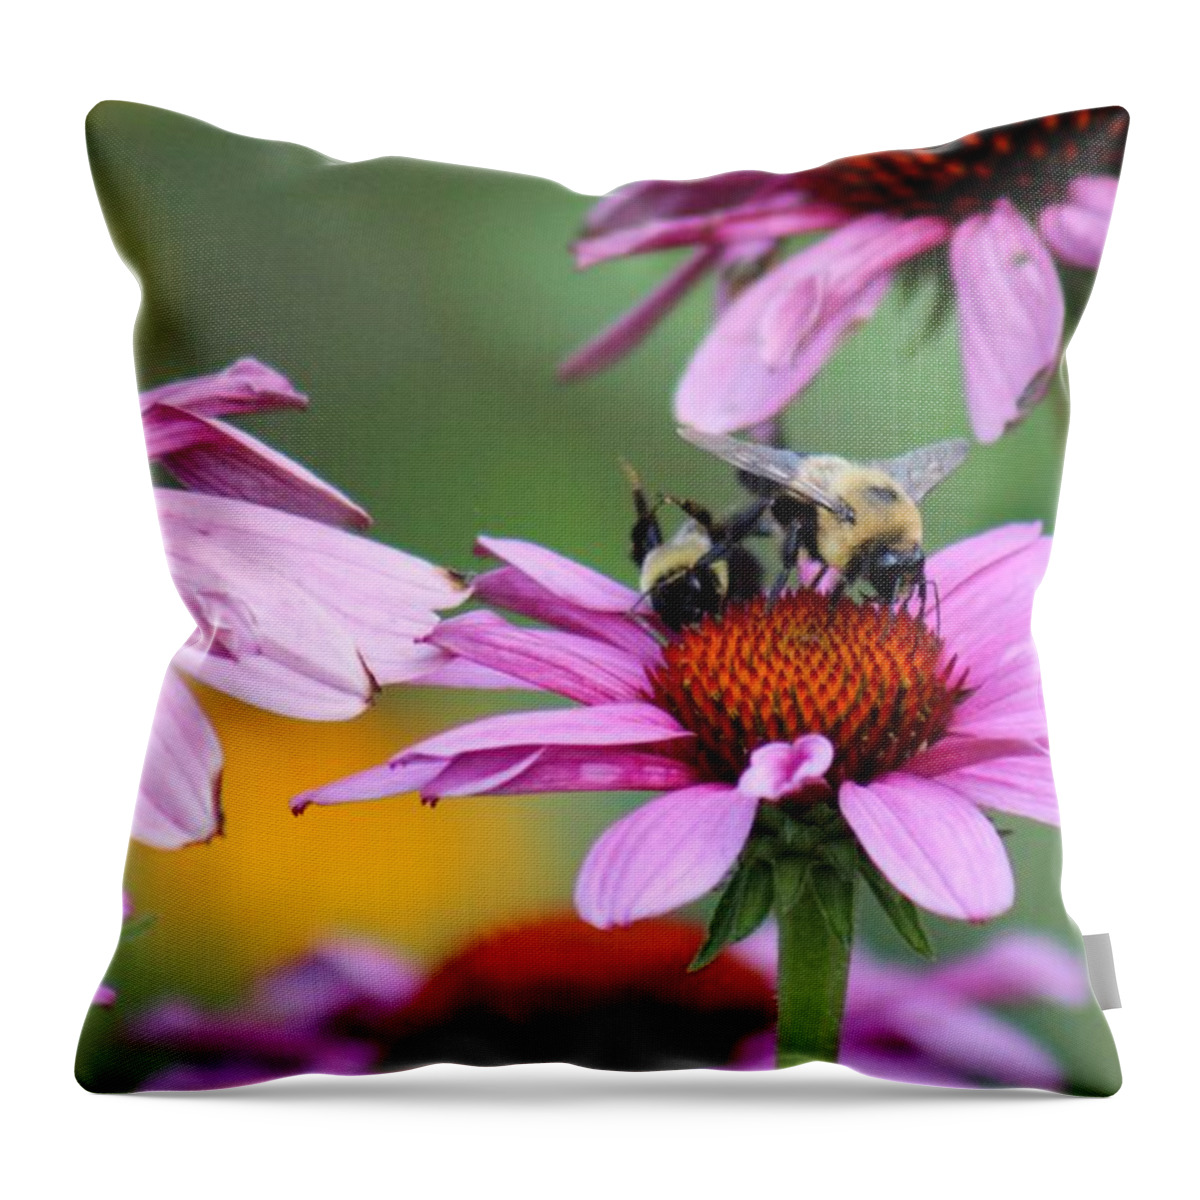 Pink Throw Pillow featuring the photograph Nature's Beauty 65 by Deena Withycombe